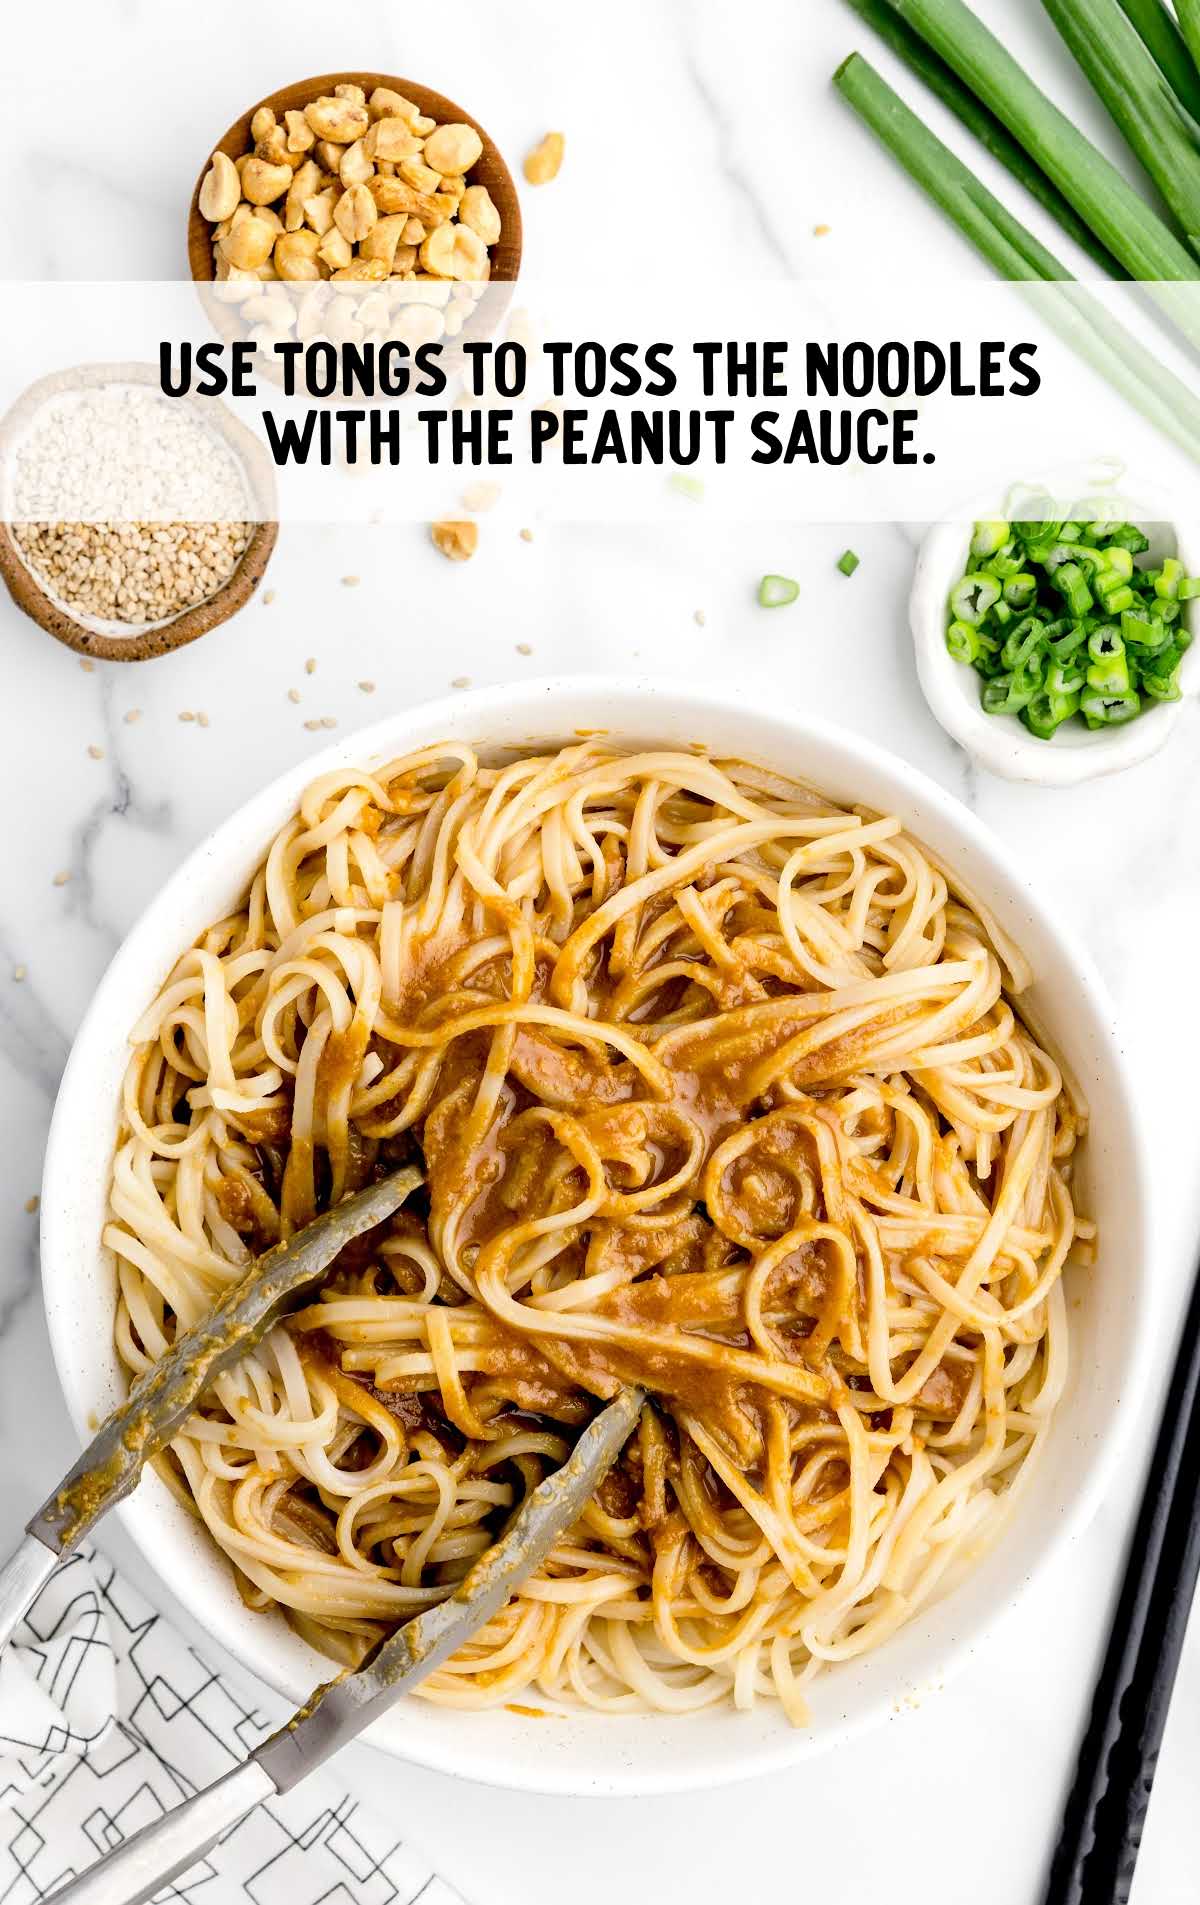 tongs used to toss noodles with the peanut sauce